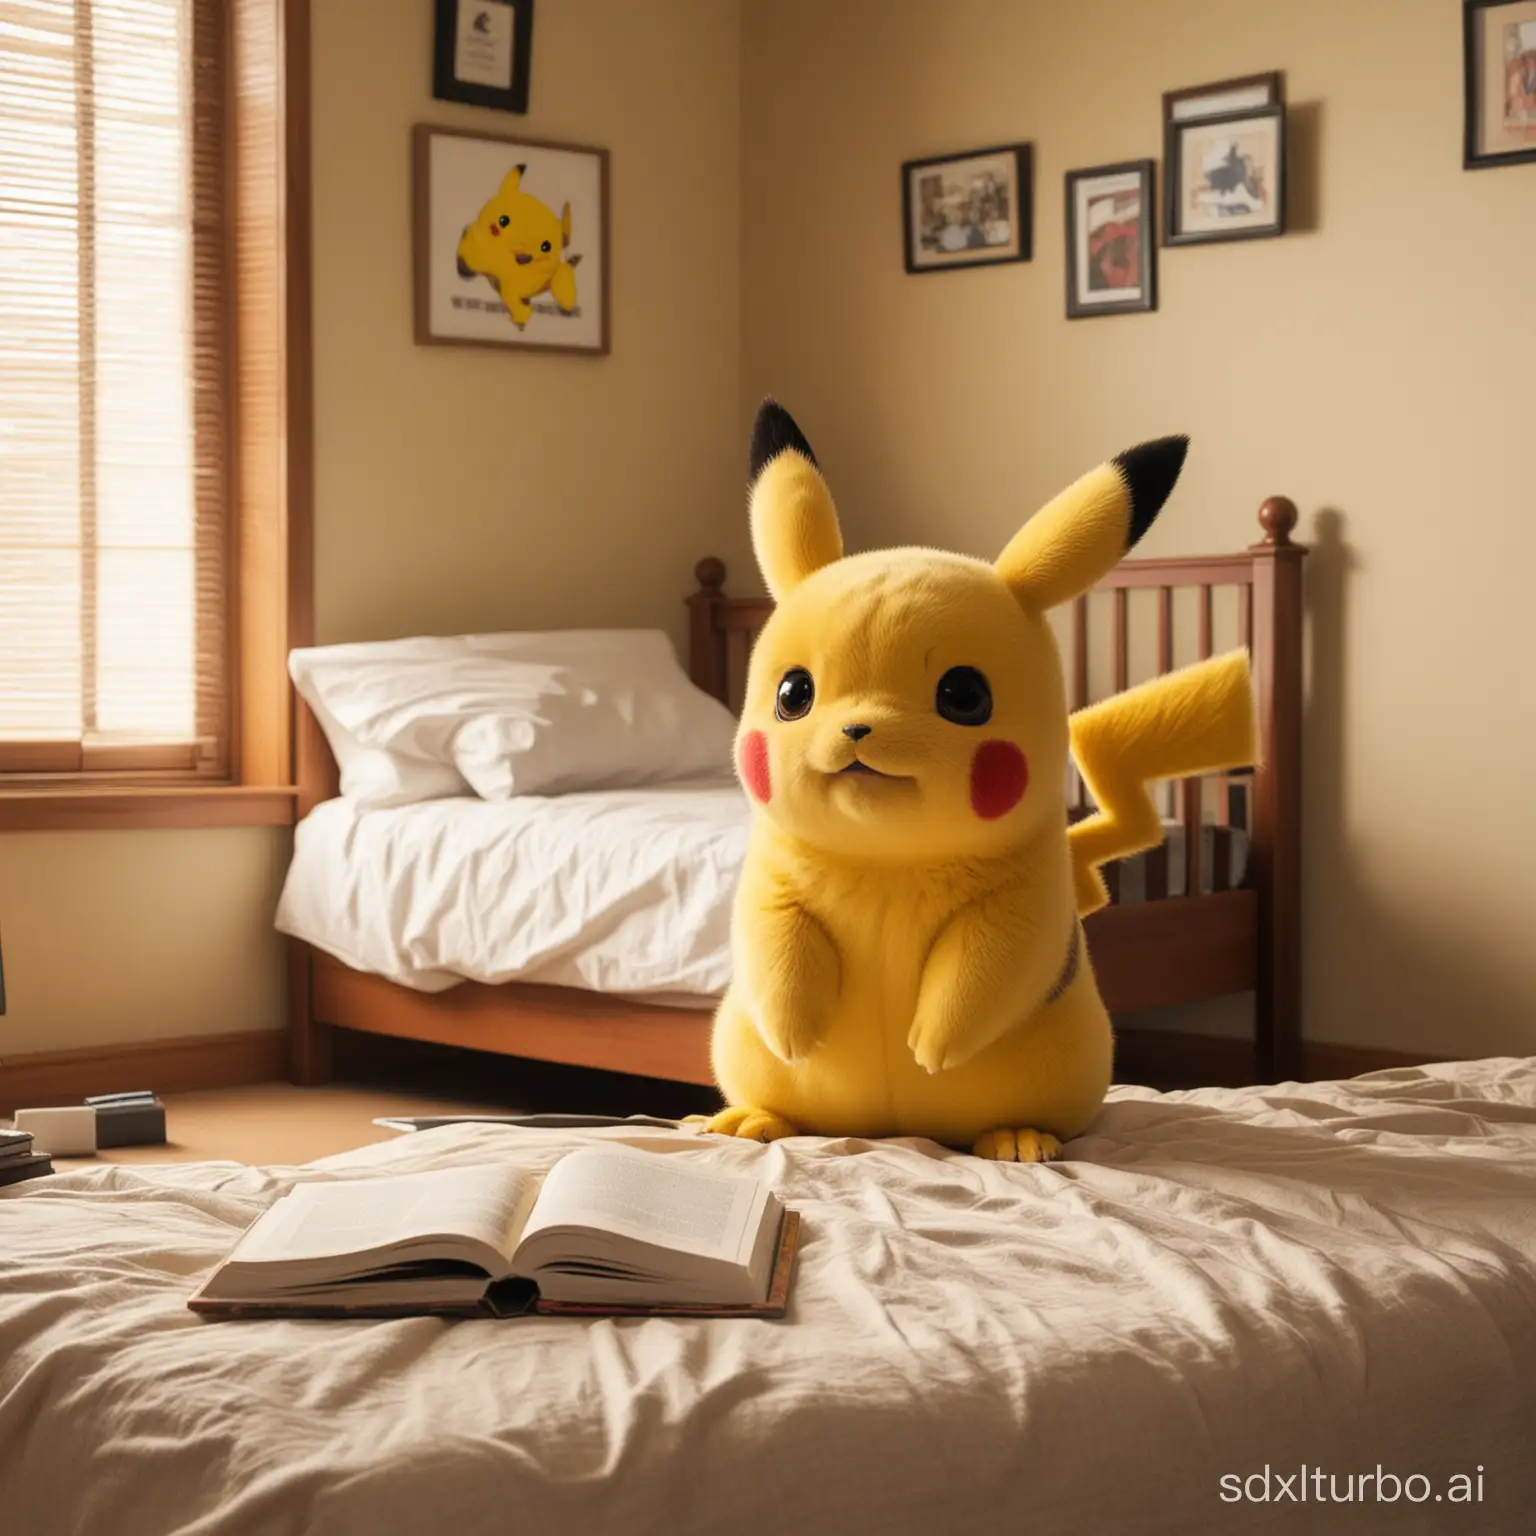 Pikachu-Studying-Diligently-in-Cozy-Bedroom